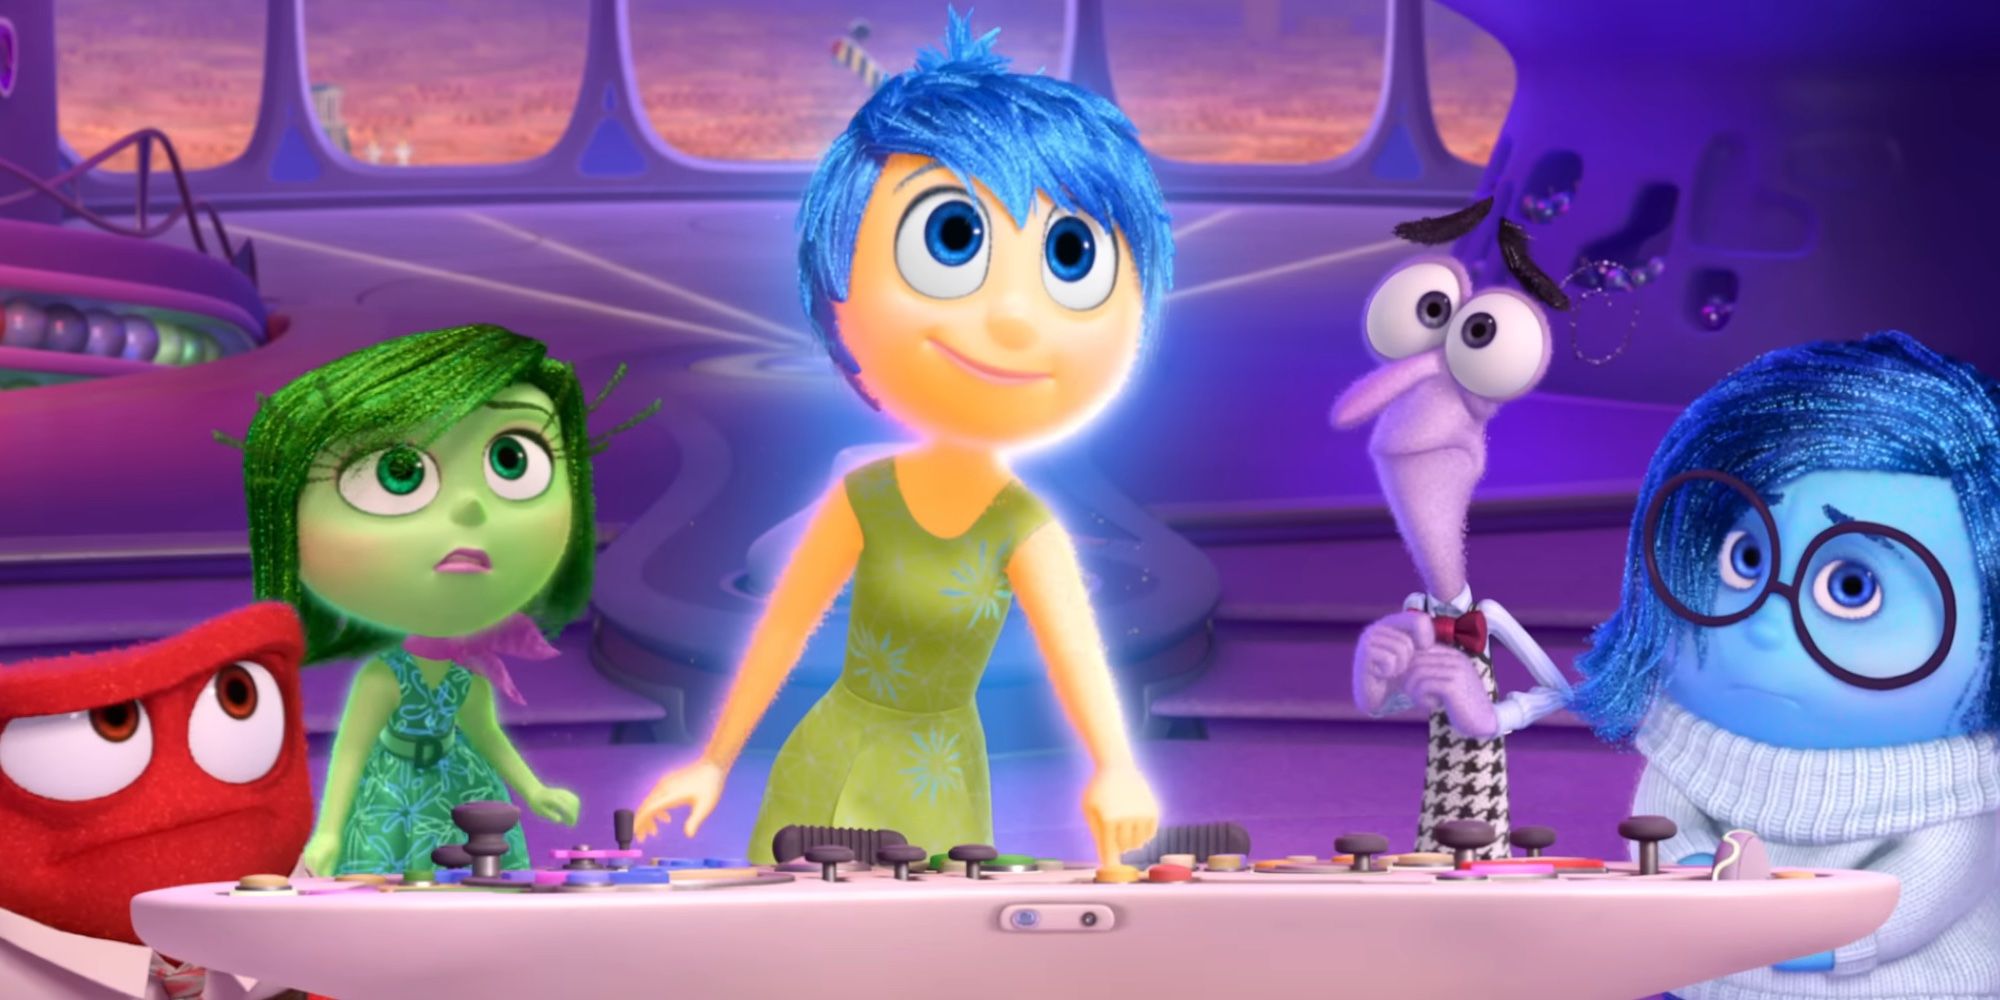 Original emotions (Anger, Disgust, Joy, Fear, and Sadness) at the console in Inside Out 2 